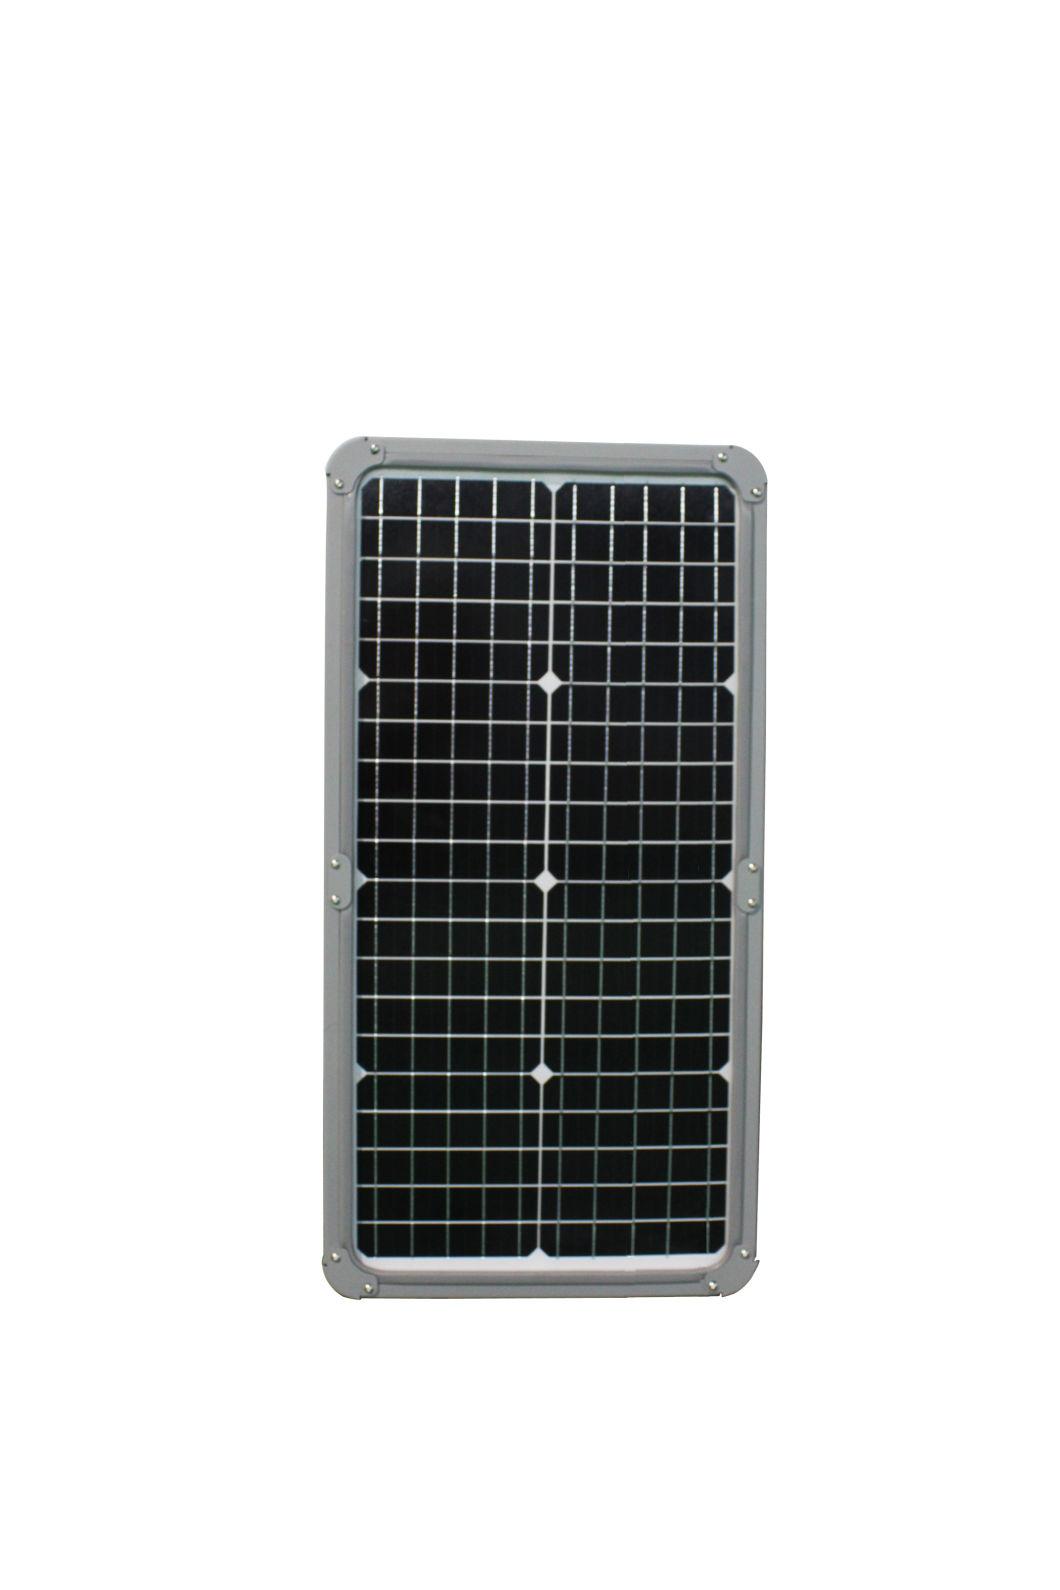 High Bright Waterproof Integrated Outdoor Auto-Cleaning 100W Solar LED Street Light for Cold Area and Desert